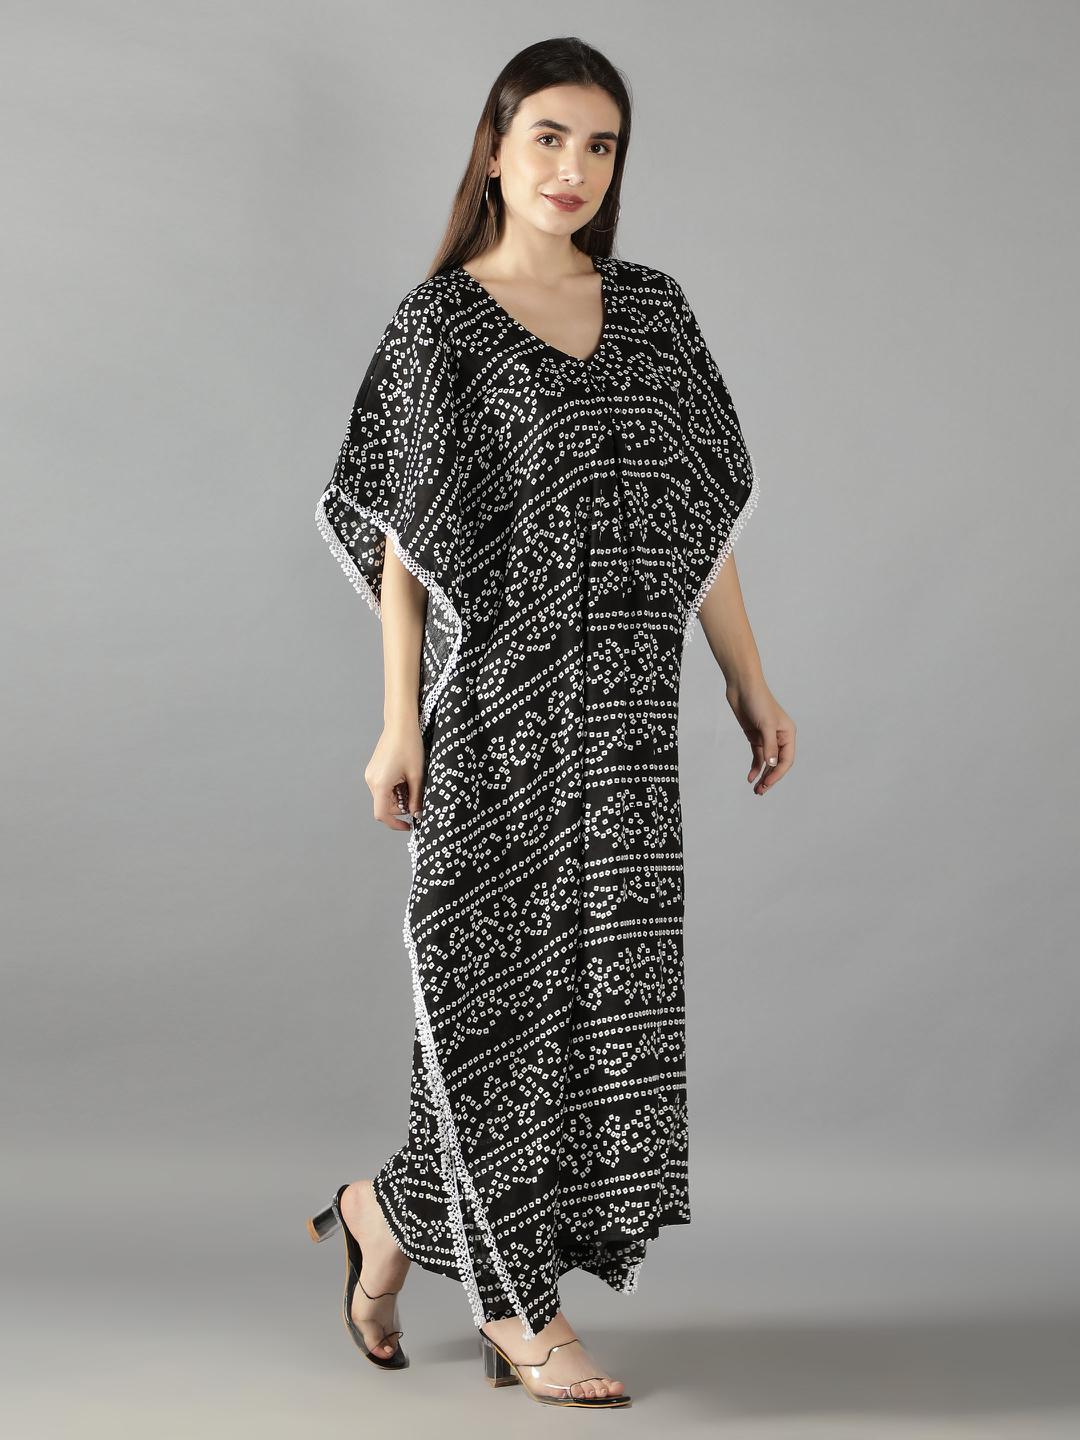 black-bhandej-caftan-with-side-lace-detailing-11721130BK, Women Clothing, Cotton Caftan